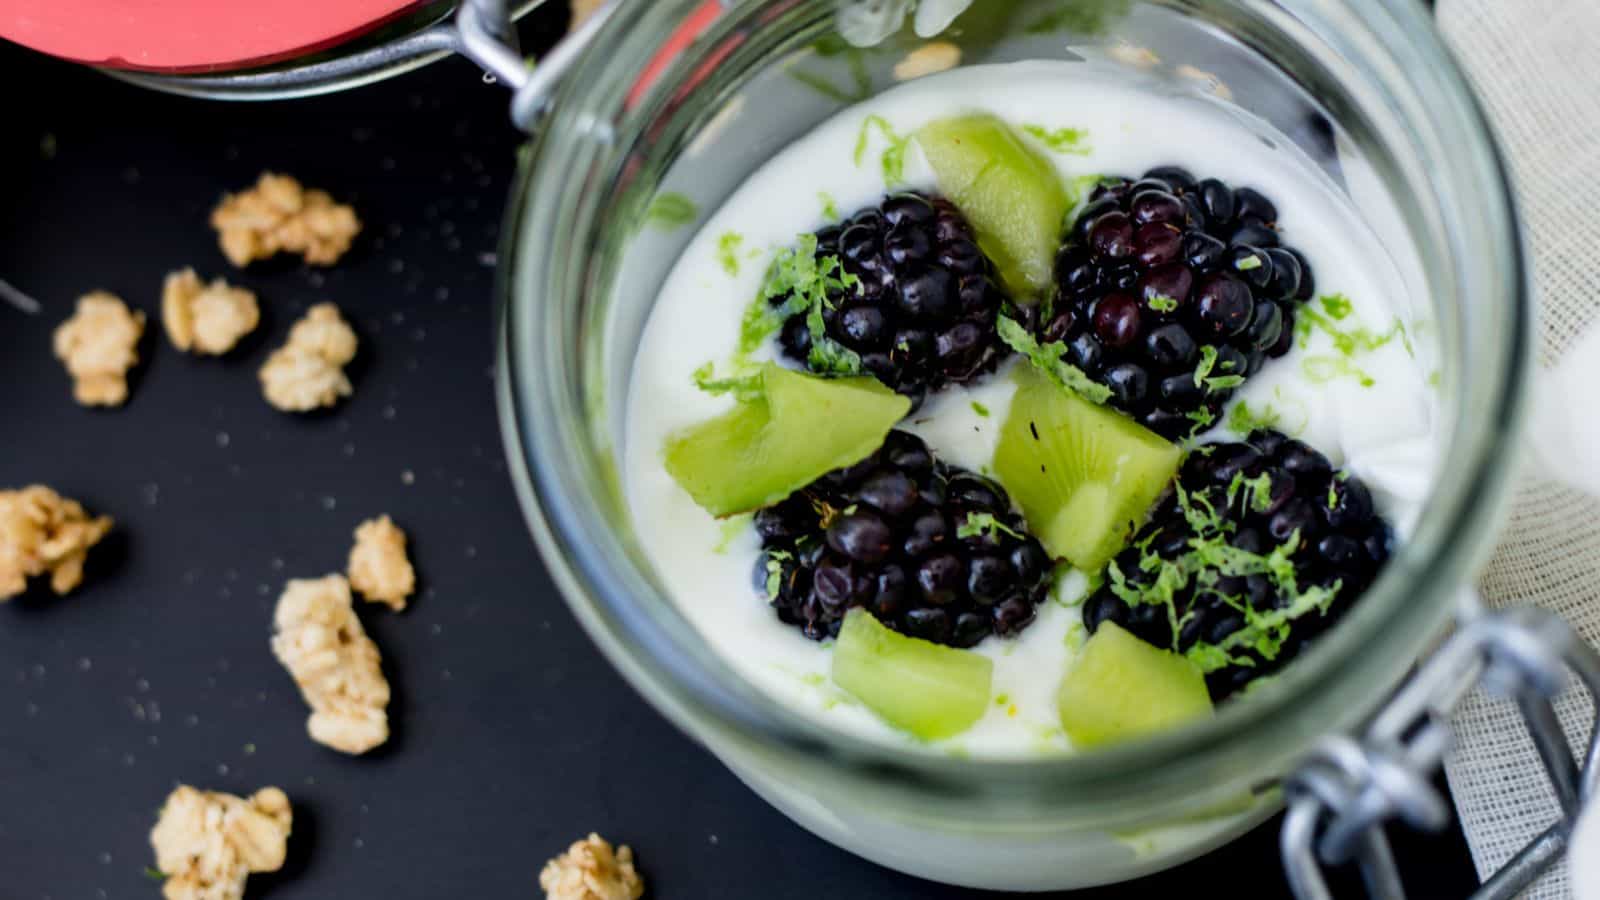 <p>Laziness meets nutrition in this Kiwi Lime Yogurt Parfait. Layered with goodness, it’s a speedy way to fuel up. Grab a spoon and indulge in the harmonious blend of tangy kiwi, zesty lime, and sweet blackberries.<br><strong>Get the Recipe: </strong><a href="https://immigrantstable.com/kiwi-lime-and-blackberry-yogurt-parfait/?utm_source=msn&utm_medium=page&utm_campaign=18 extremely quick and easy breakfast ideas for lazy people">Kiwi Lime Yogurt Parfait</a></p>